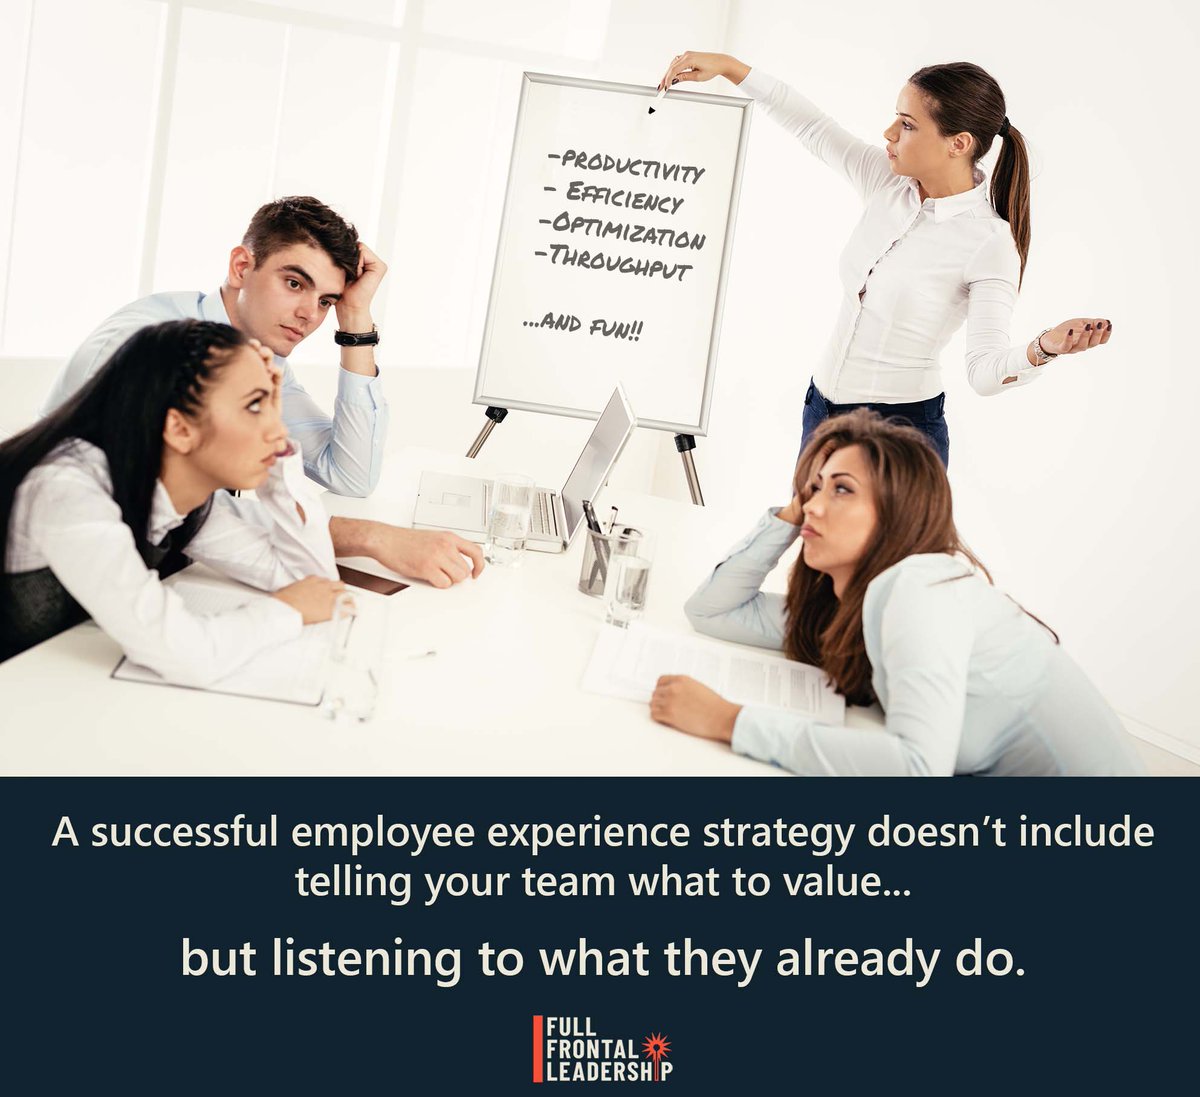 Are your employee experience strategies falling flat? Maybe it's because you're assuming what your team values, instead of asking them directly. #leadership #employeexperience #communication #NoMorePizzaParties🍕